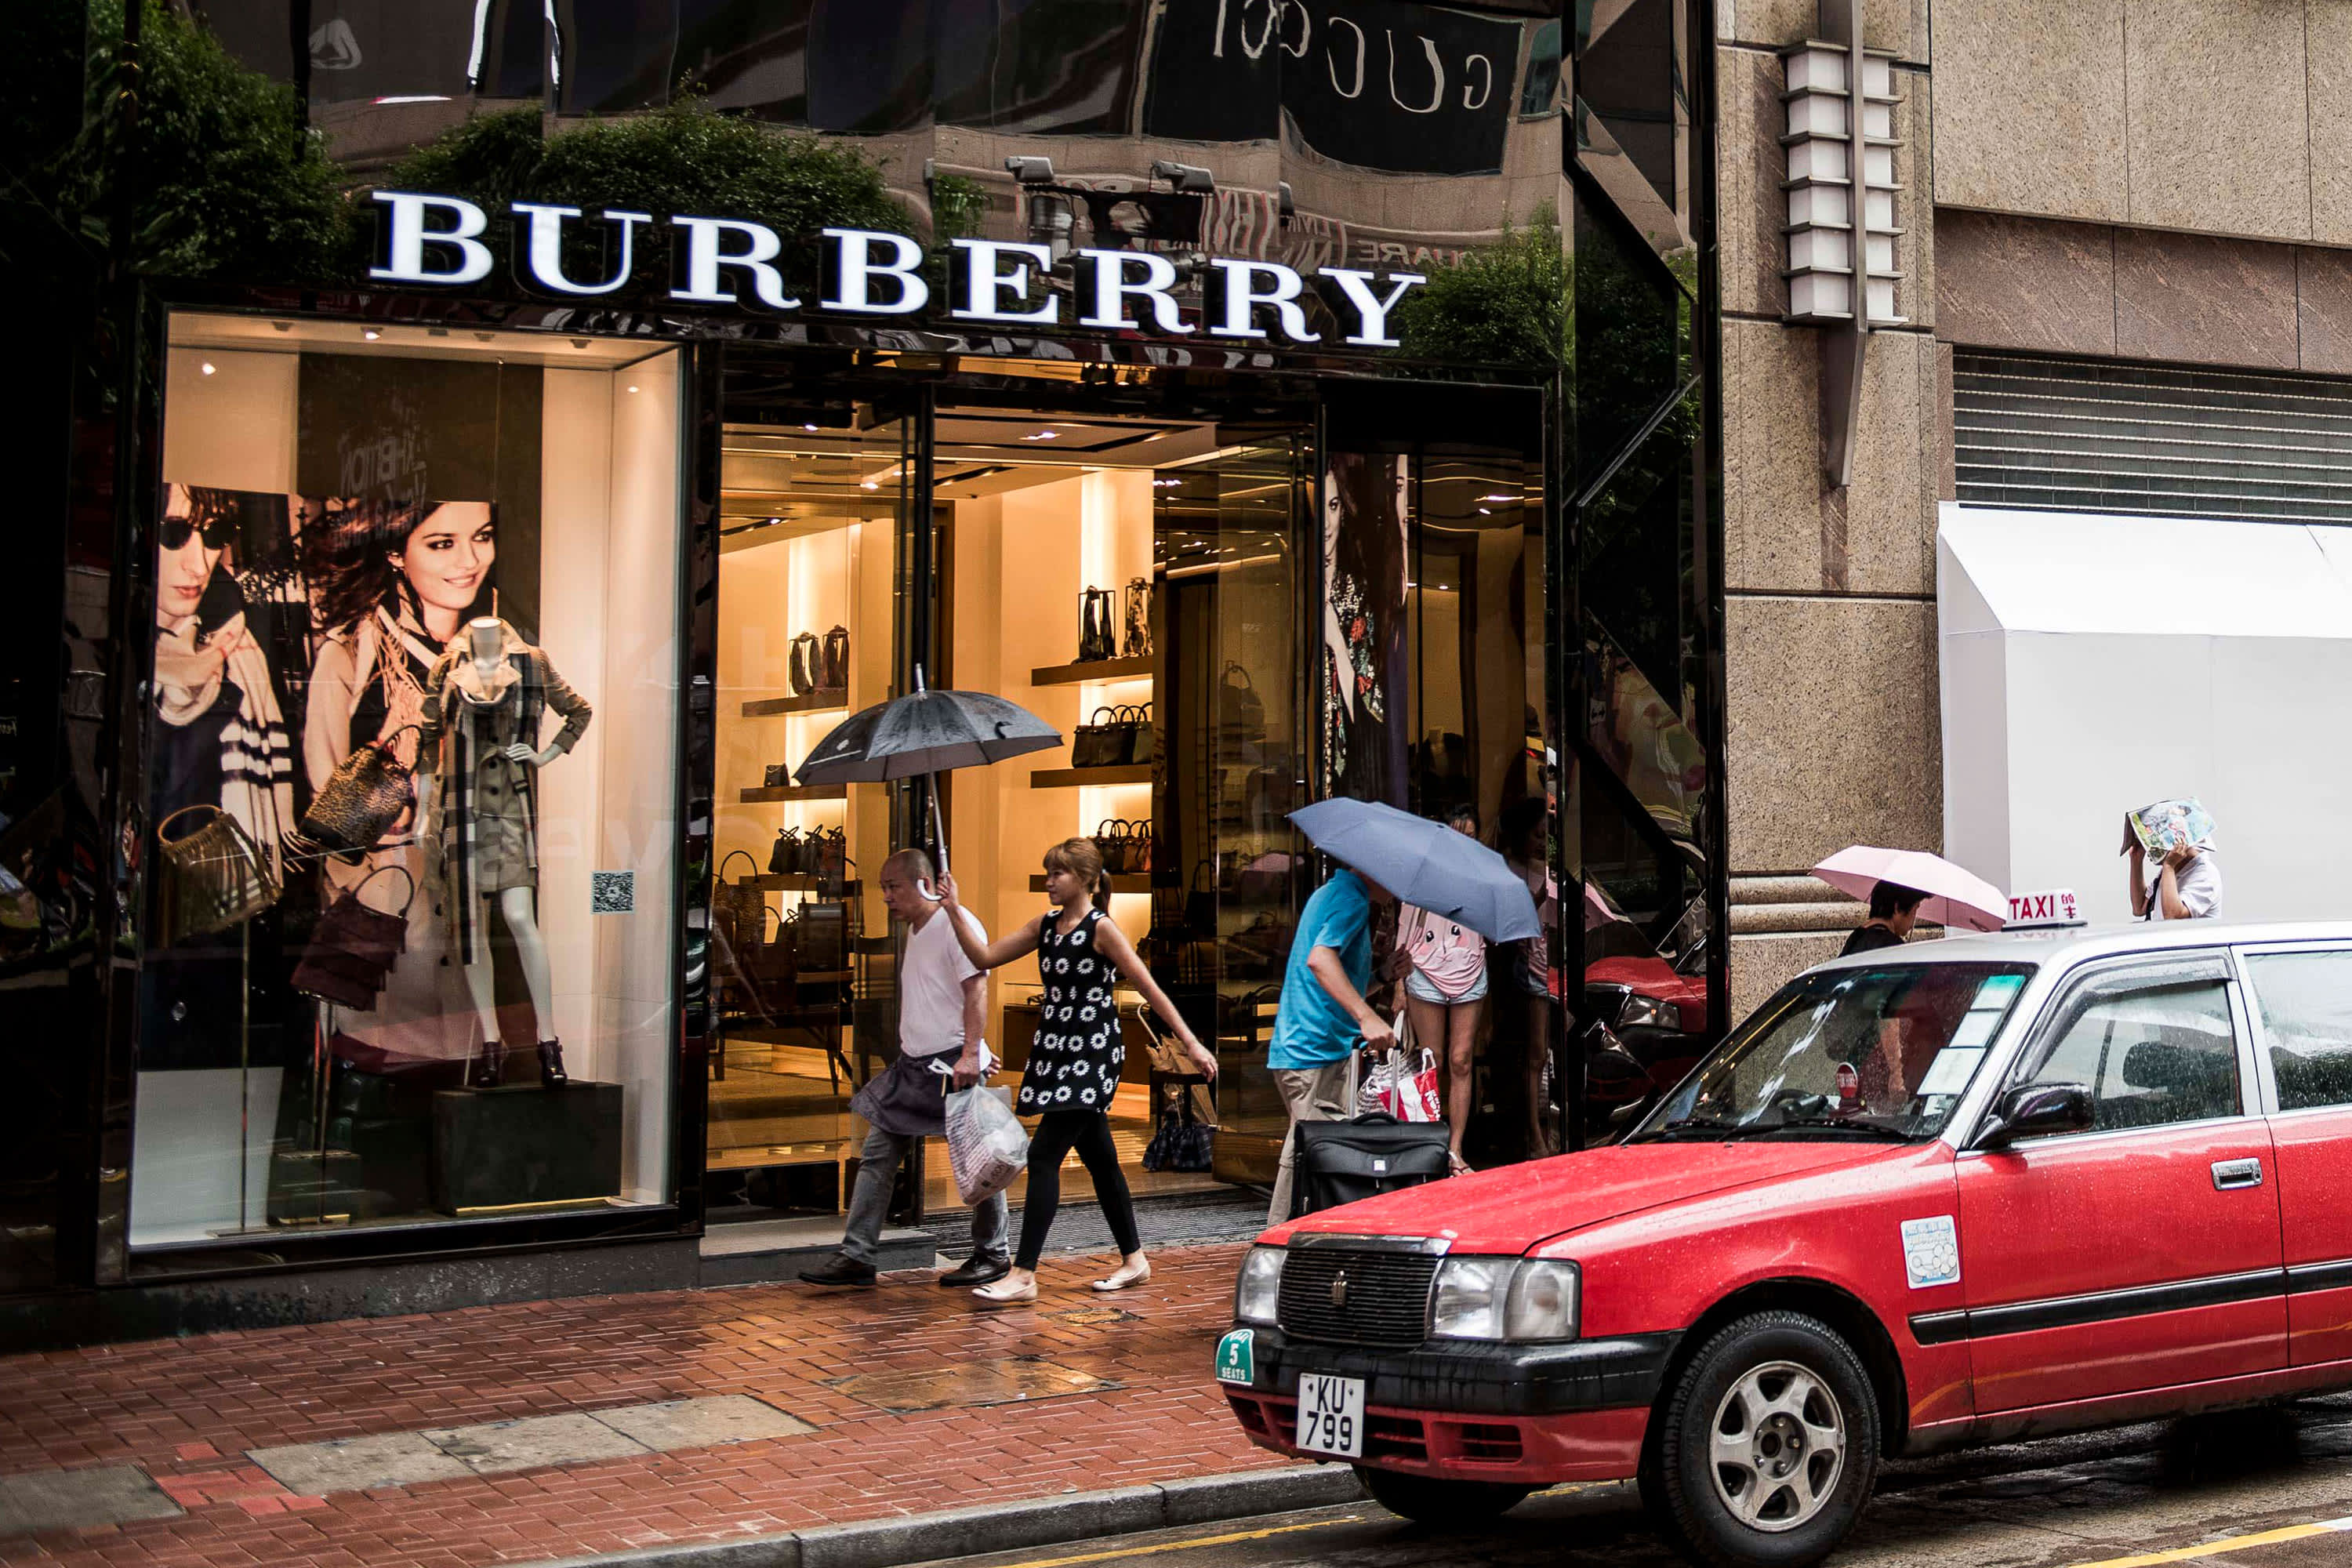 Burberry's sales plunge 80% as 